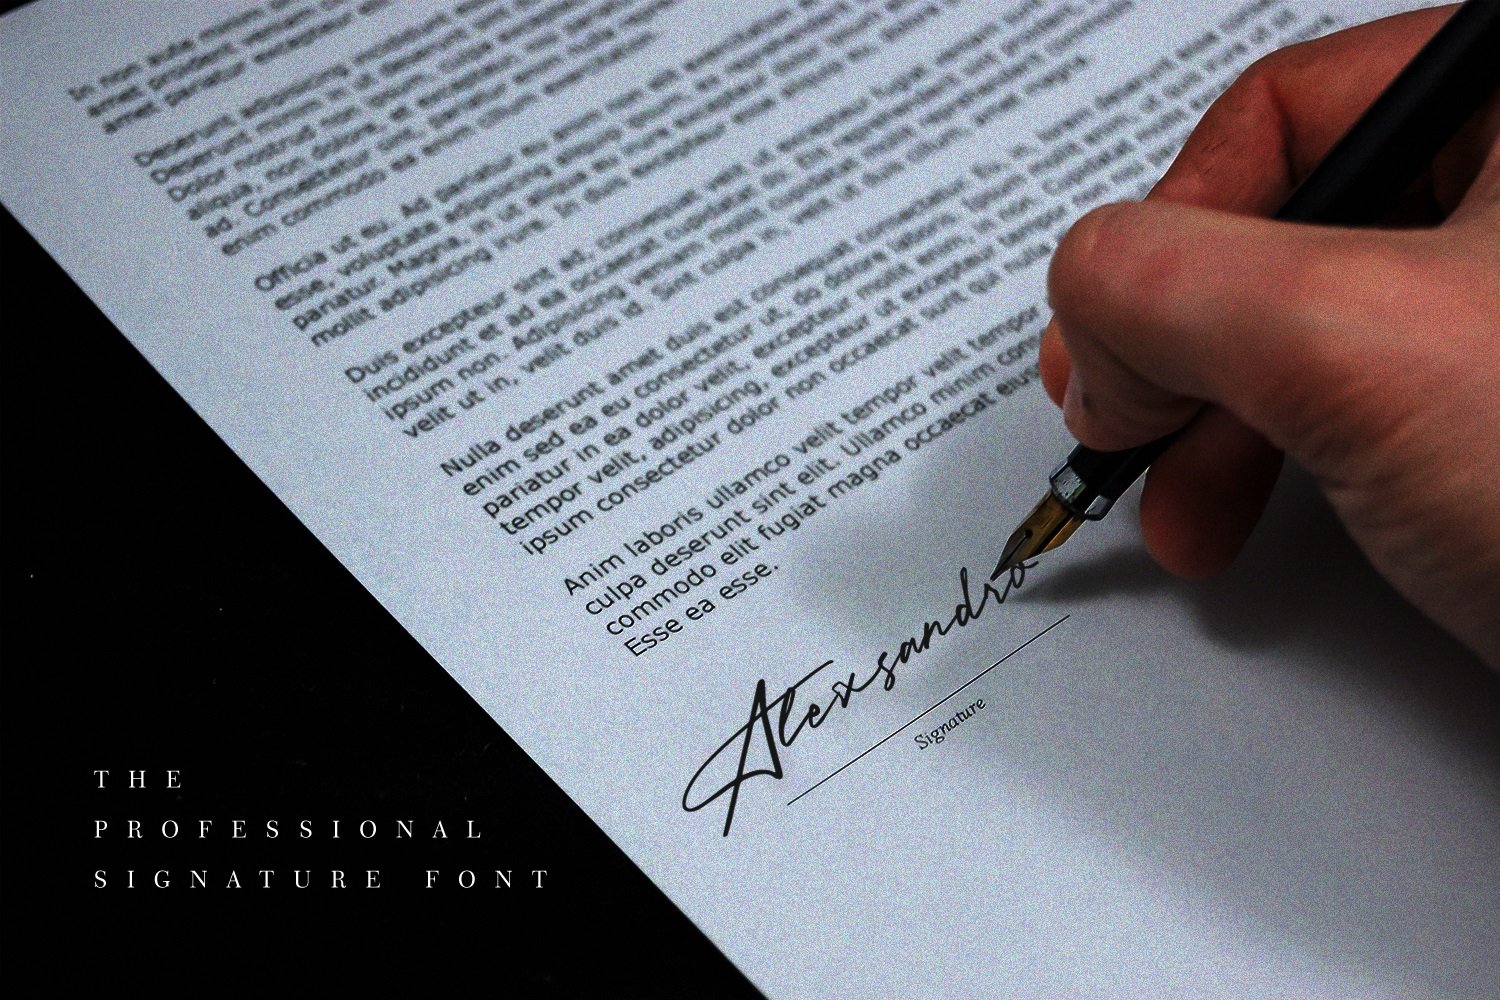 Nice and stylish font for signatures.